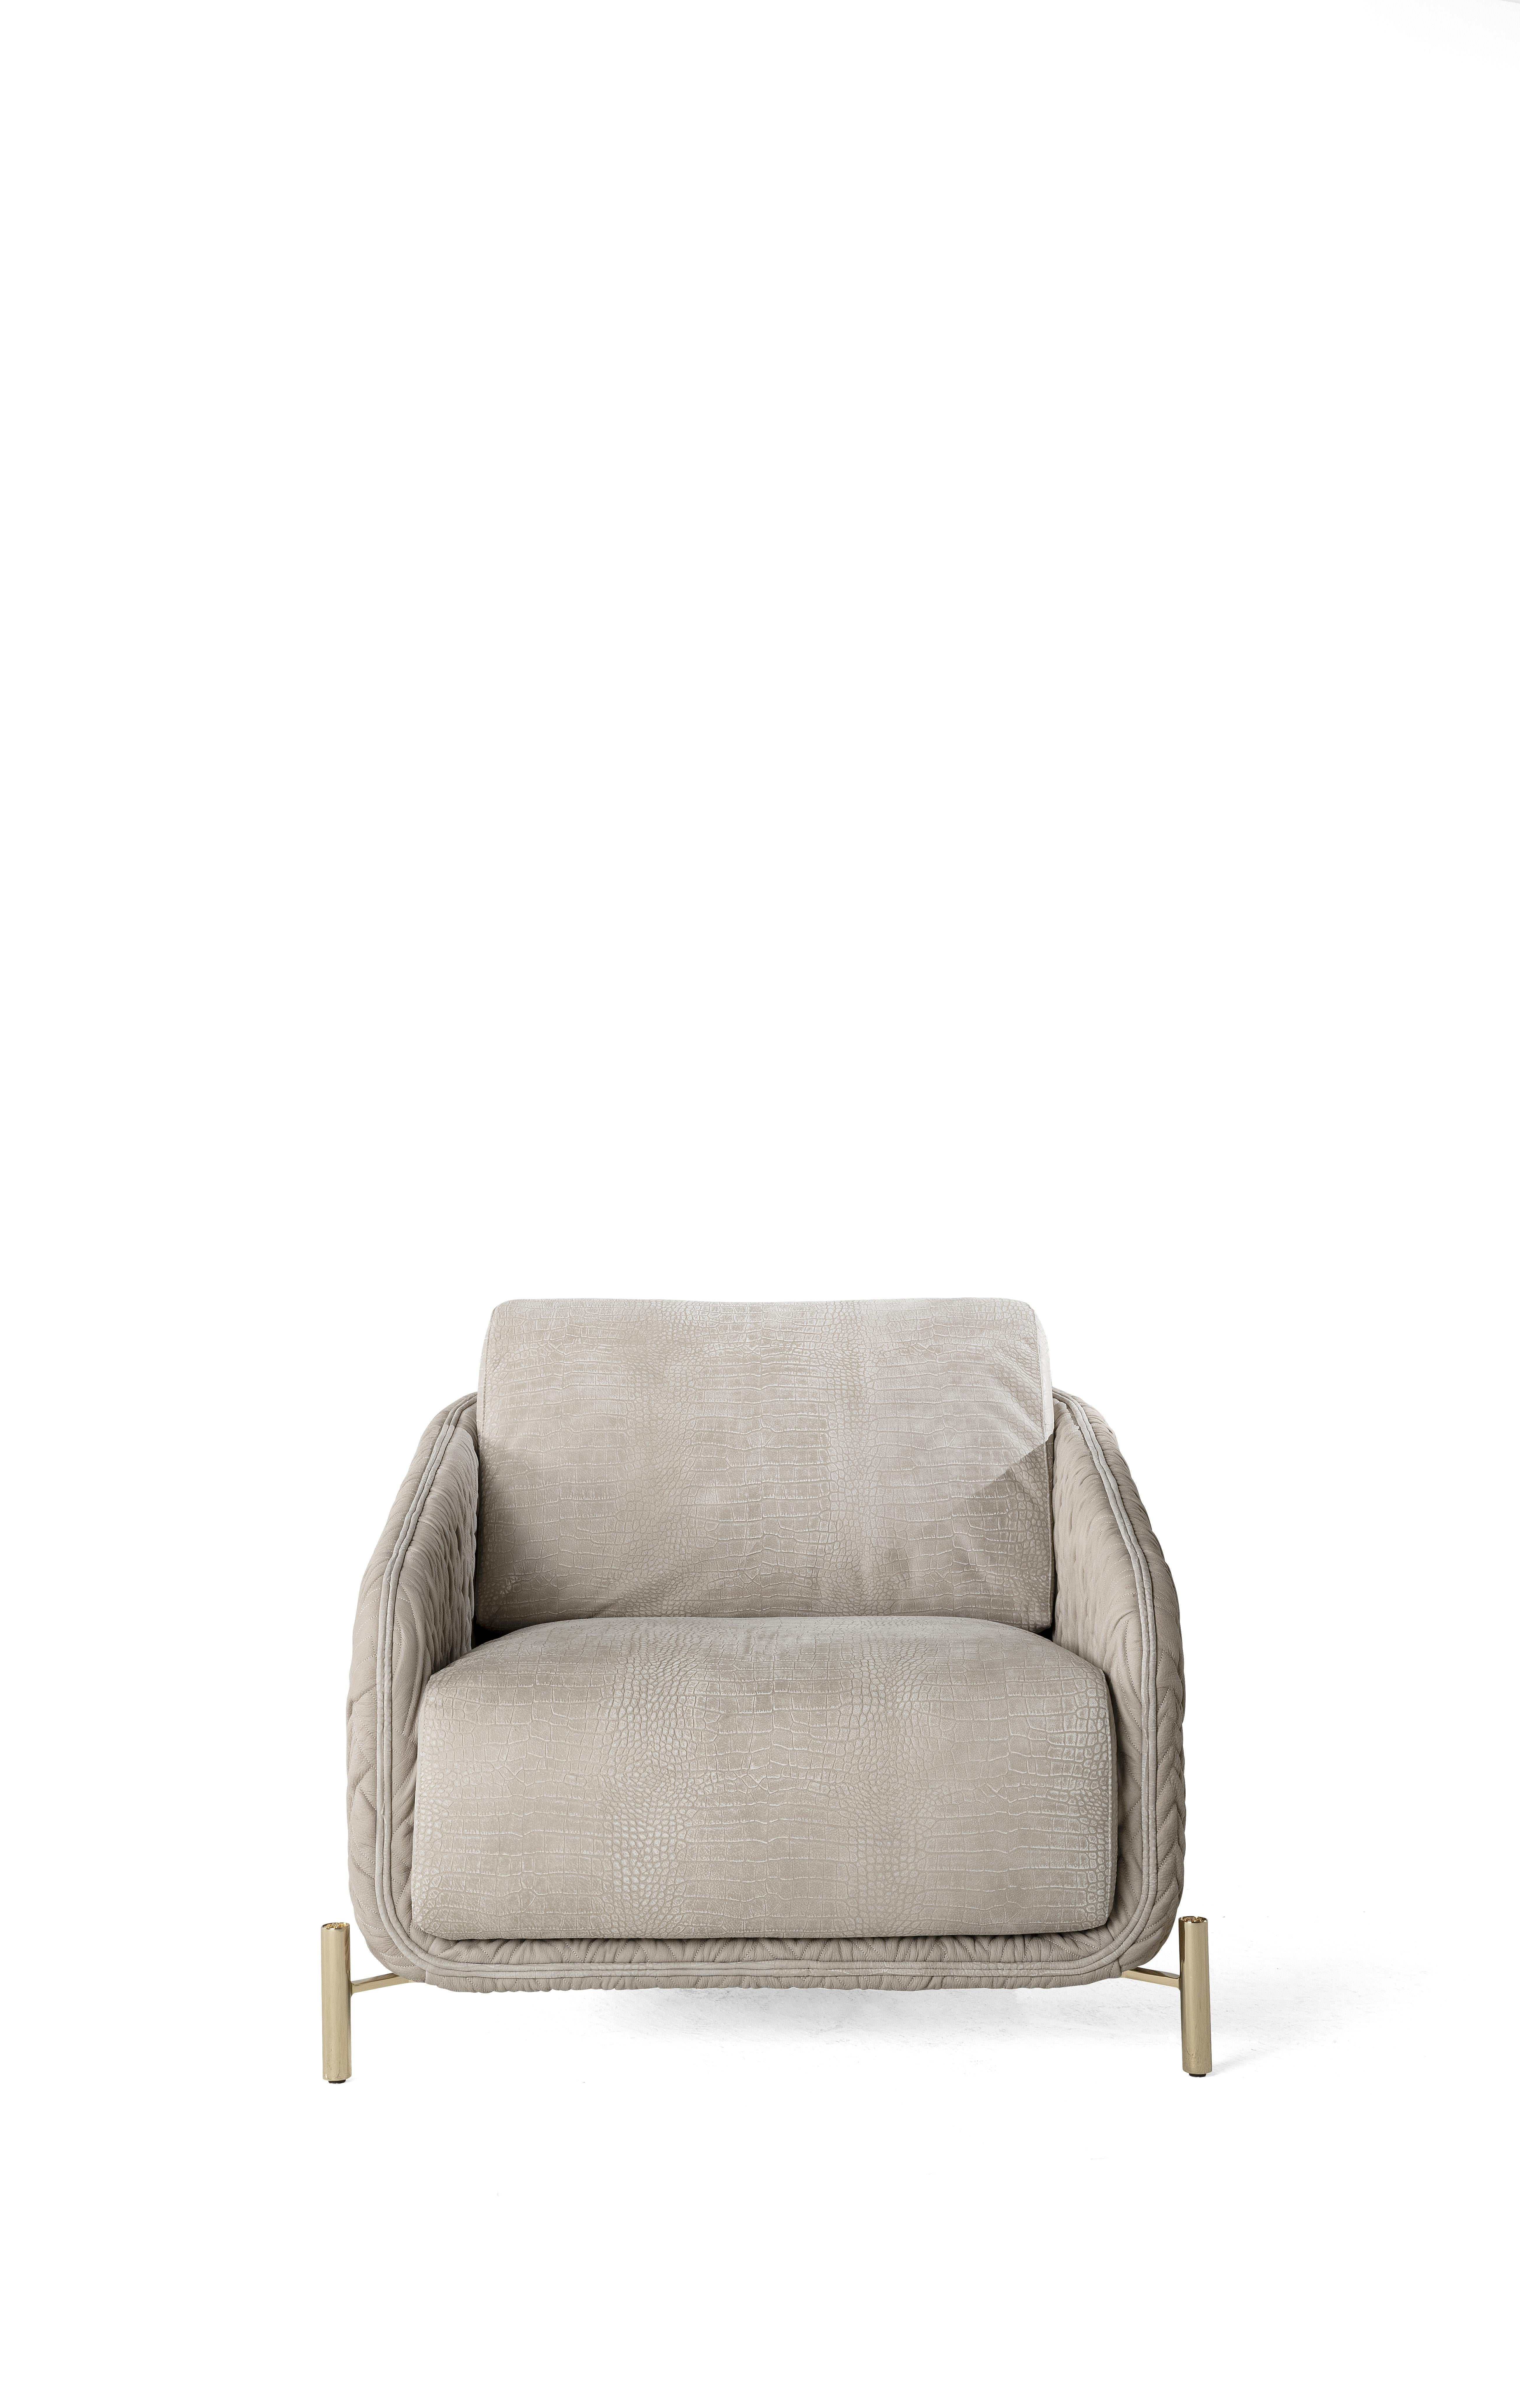 Italian 21st Century Clifton Armchair in Leather by Roberto Cavalli Home Interiors For Sale